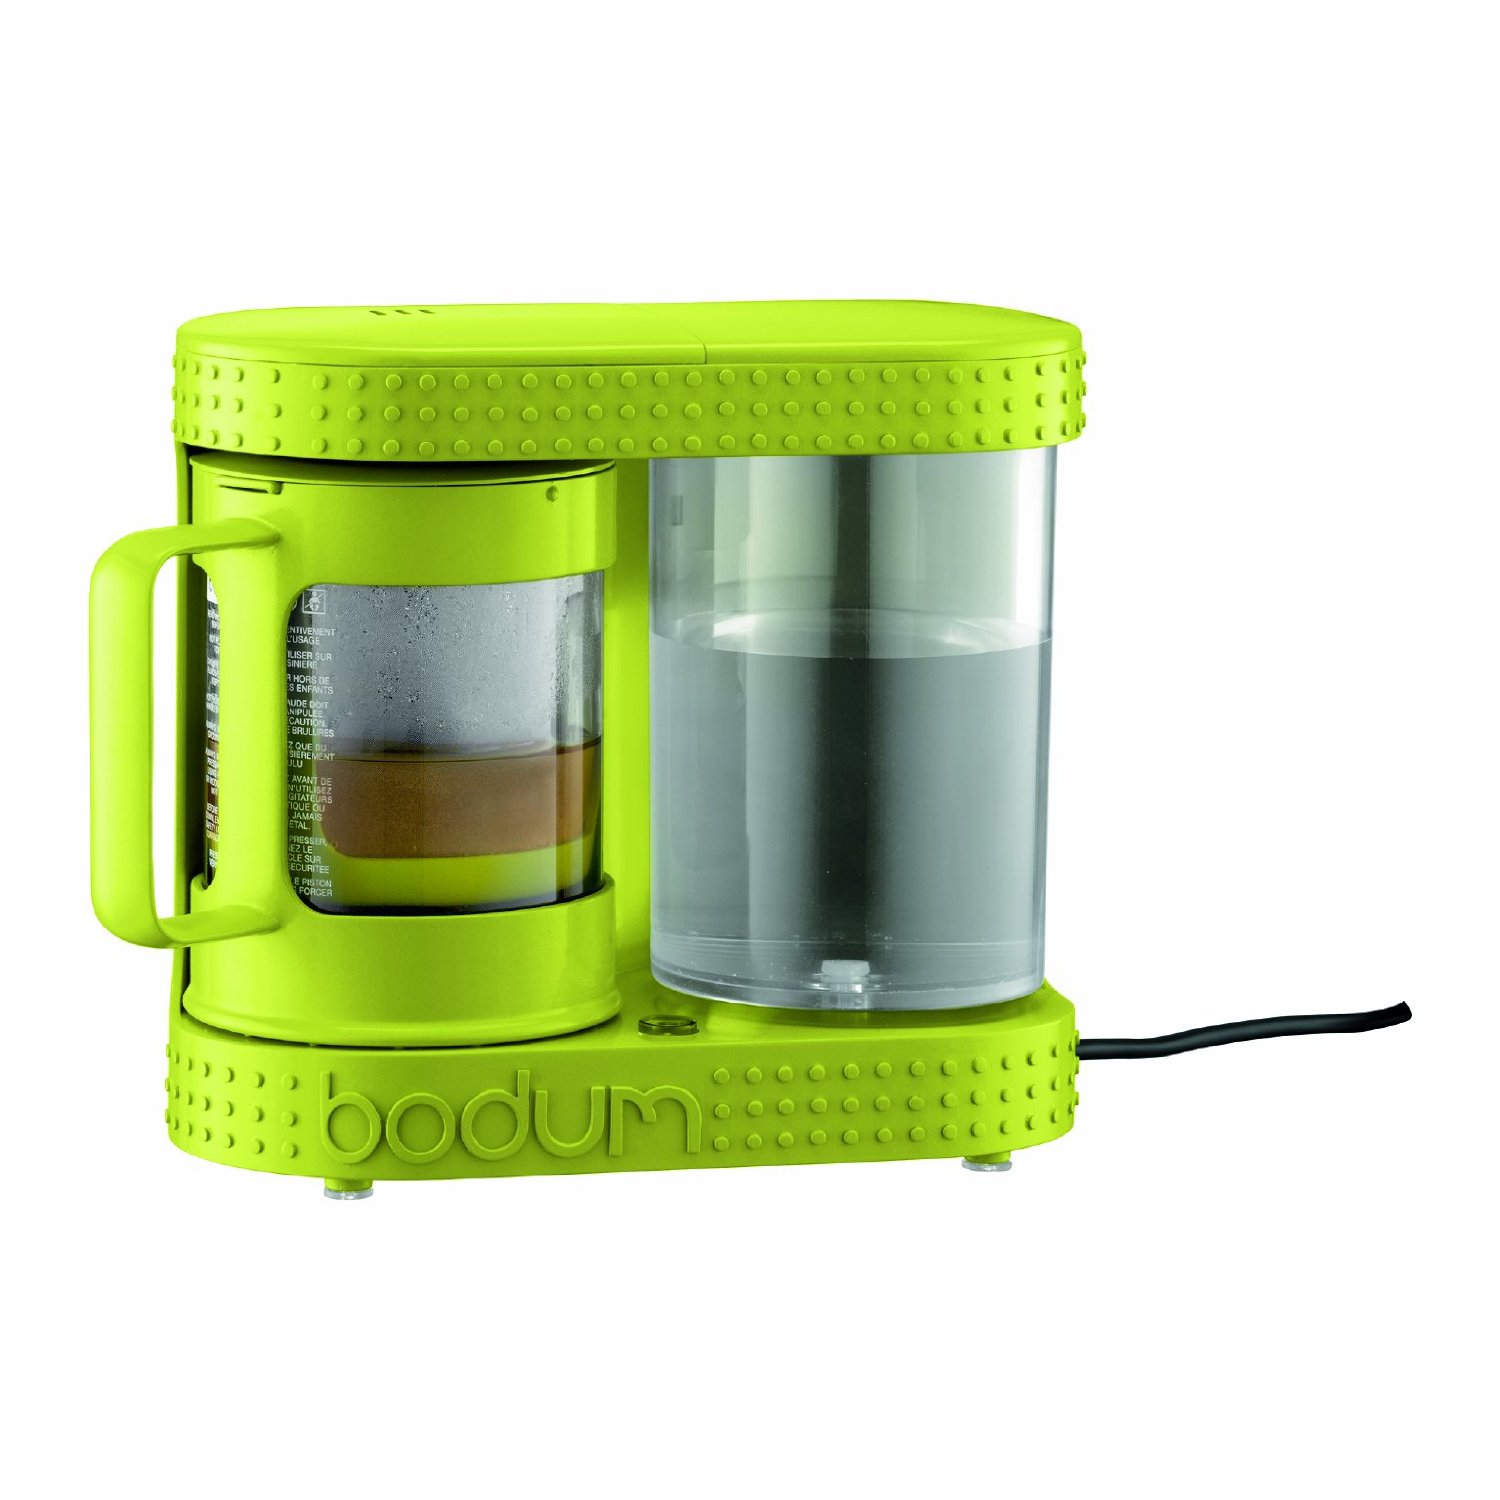 Bodum Bistro Electric French Press Coffee Maker and Tea Dripper, 4-Cup (Lime Green)  $29.99 